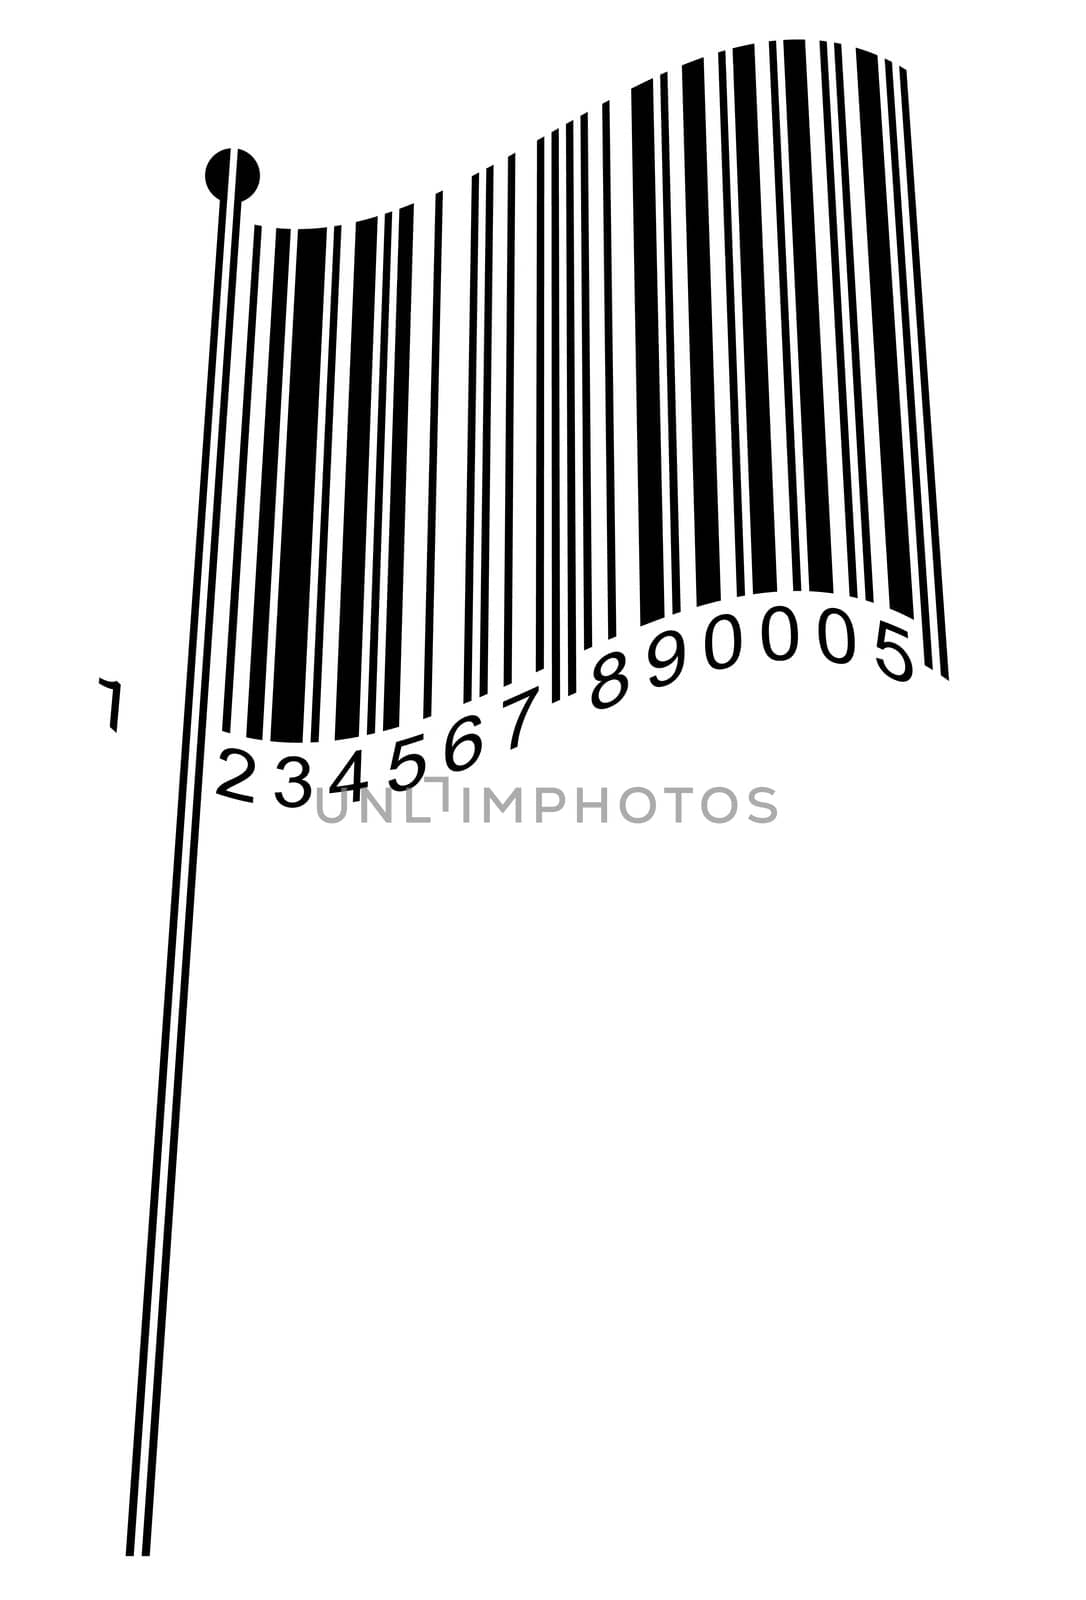 Barcode Flag - concept image